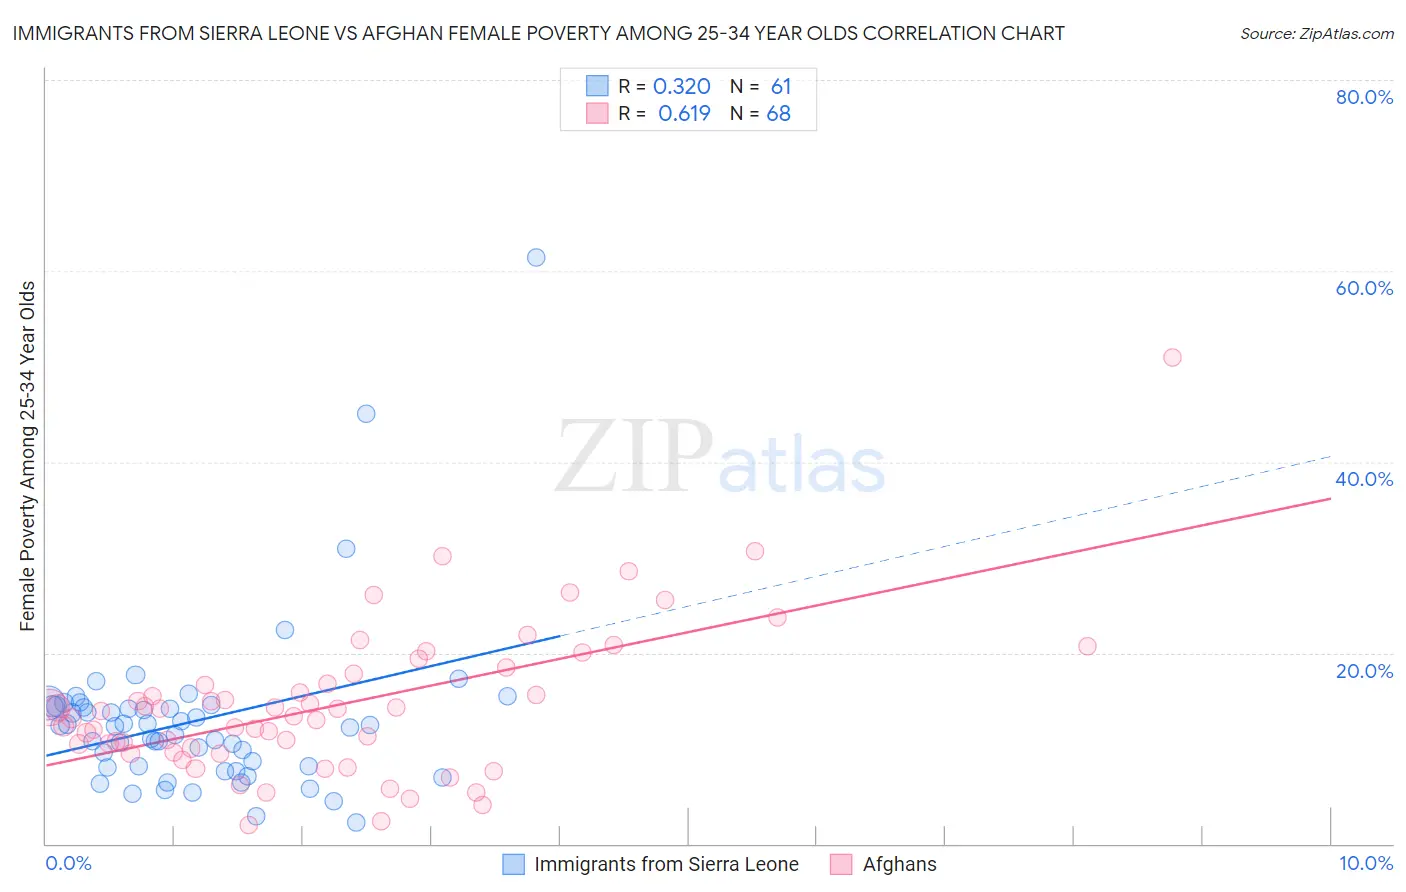 Immigrants from Sierra Leone vs Afghan Female Poverty Among 25-34 Year Olds